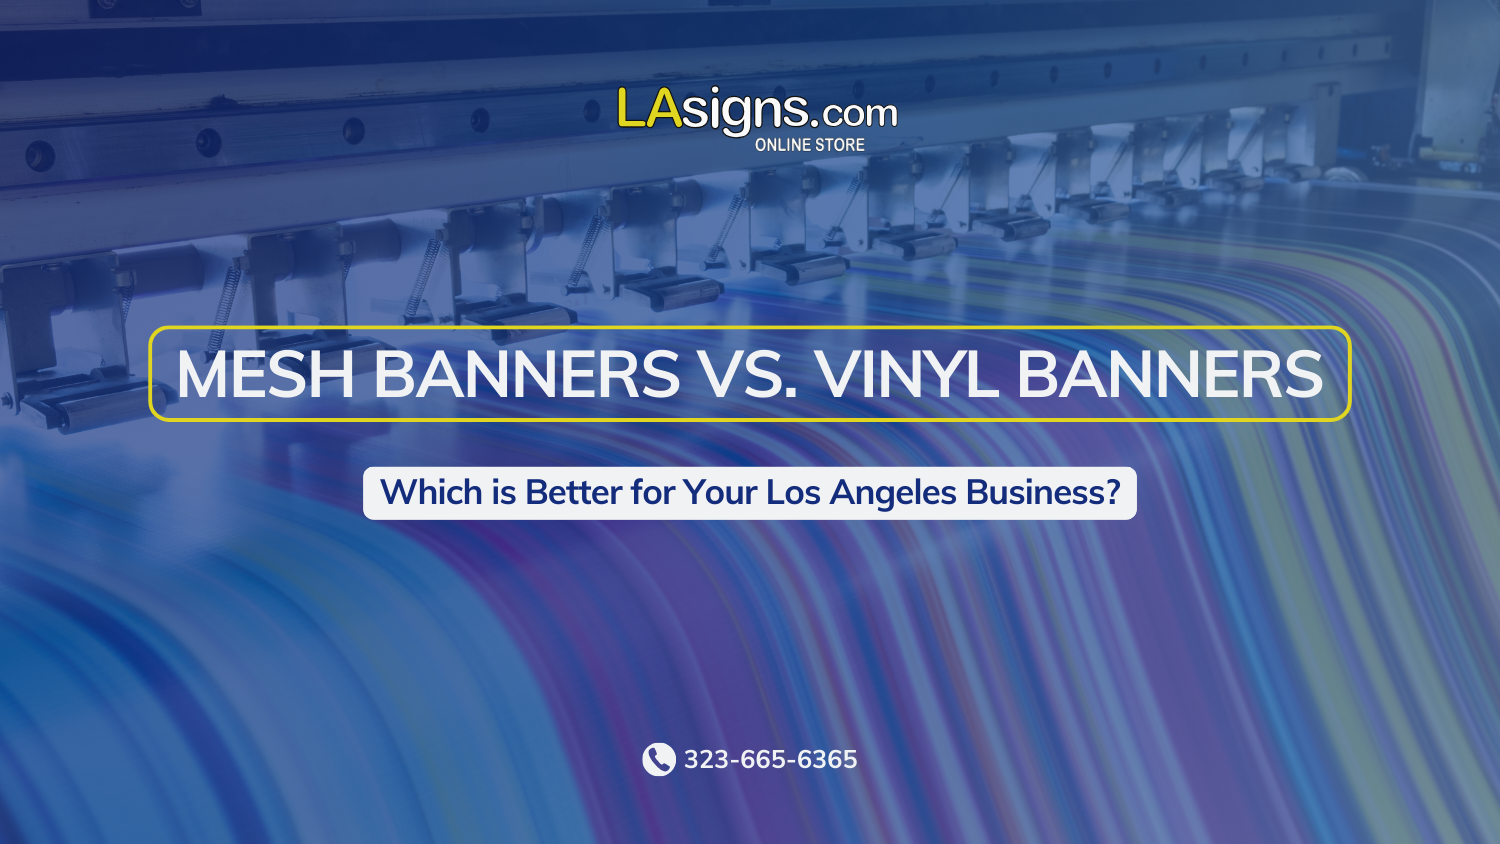 Mesh Banners vs. Vinyl Banners: Which is Better for Your Los Angeles Business